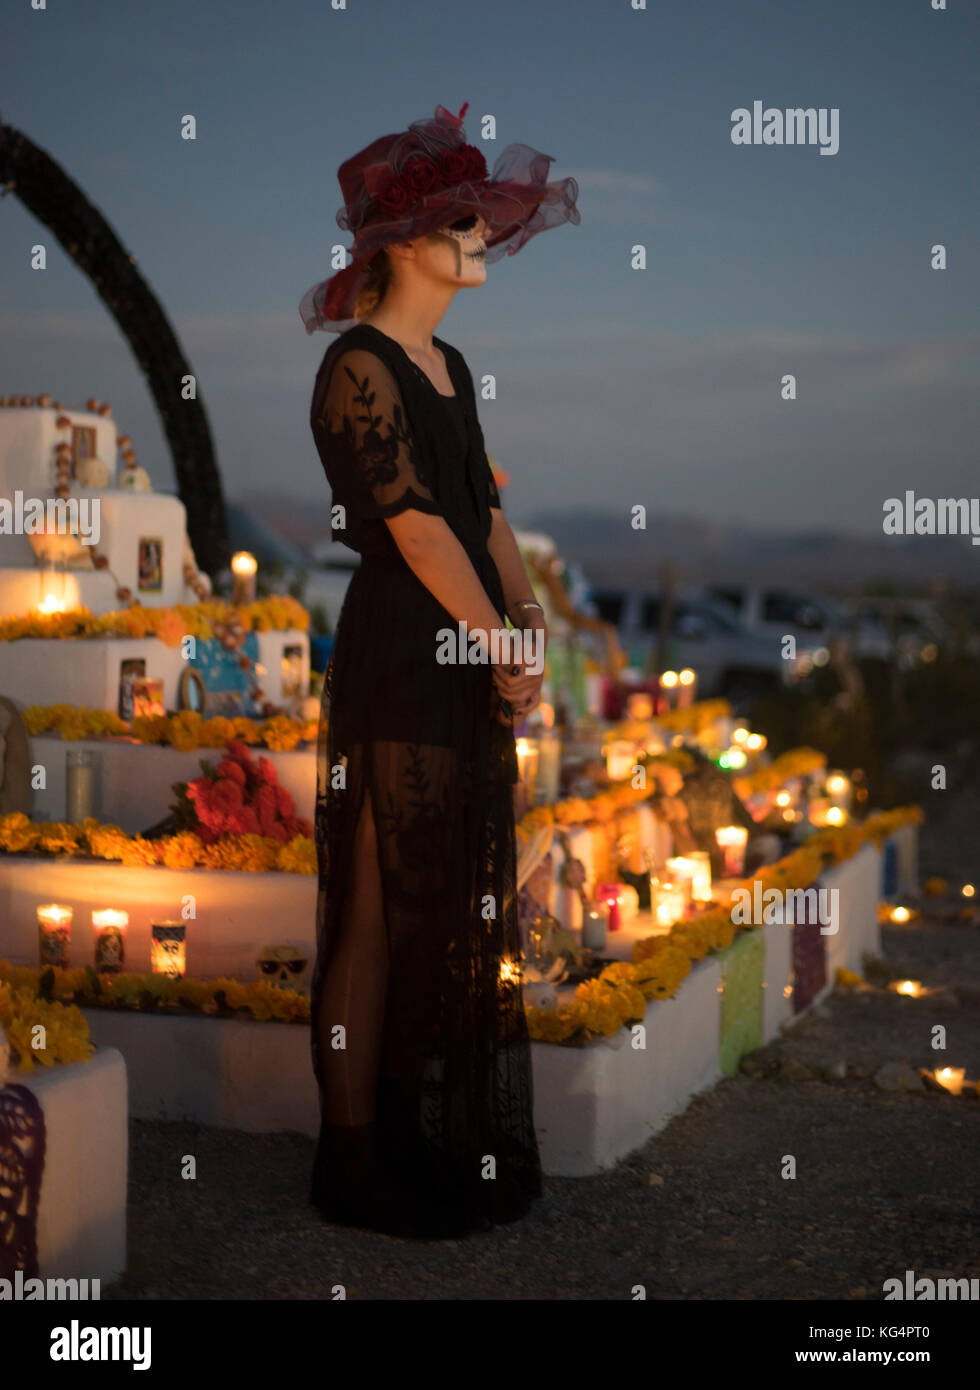 Celebration of Dia de los Muertos, The Day of the Dead, in Terlingua, a former ghost town istuated on the border with Mexico in far West Texas. Stock Photo